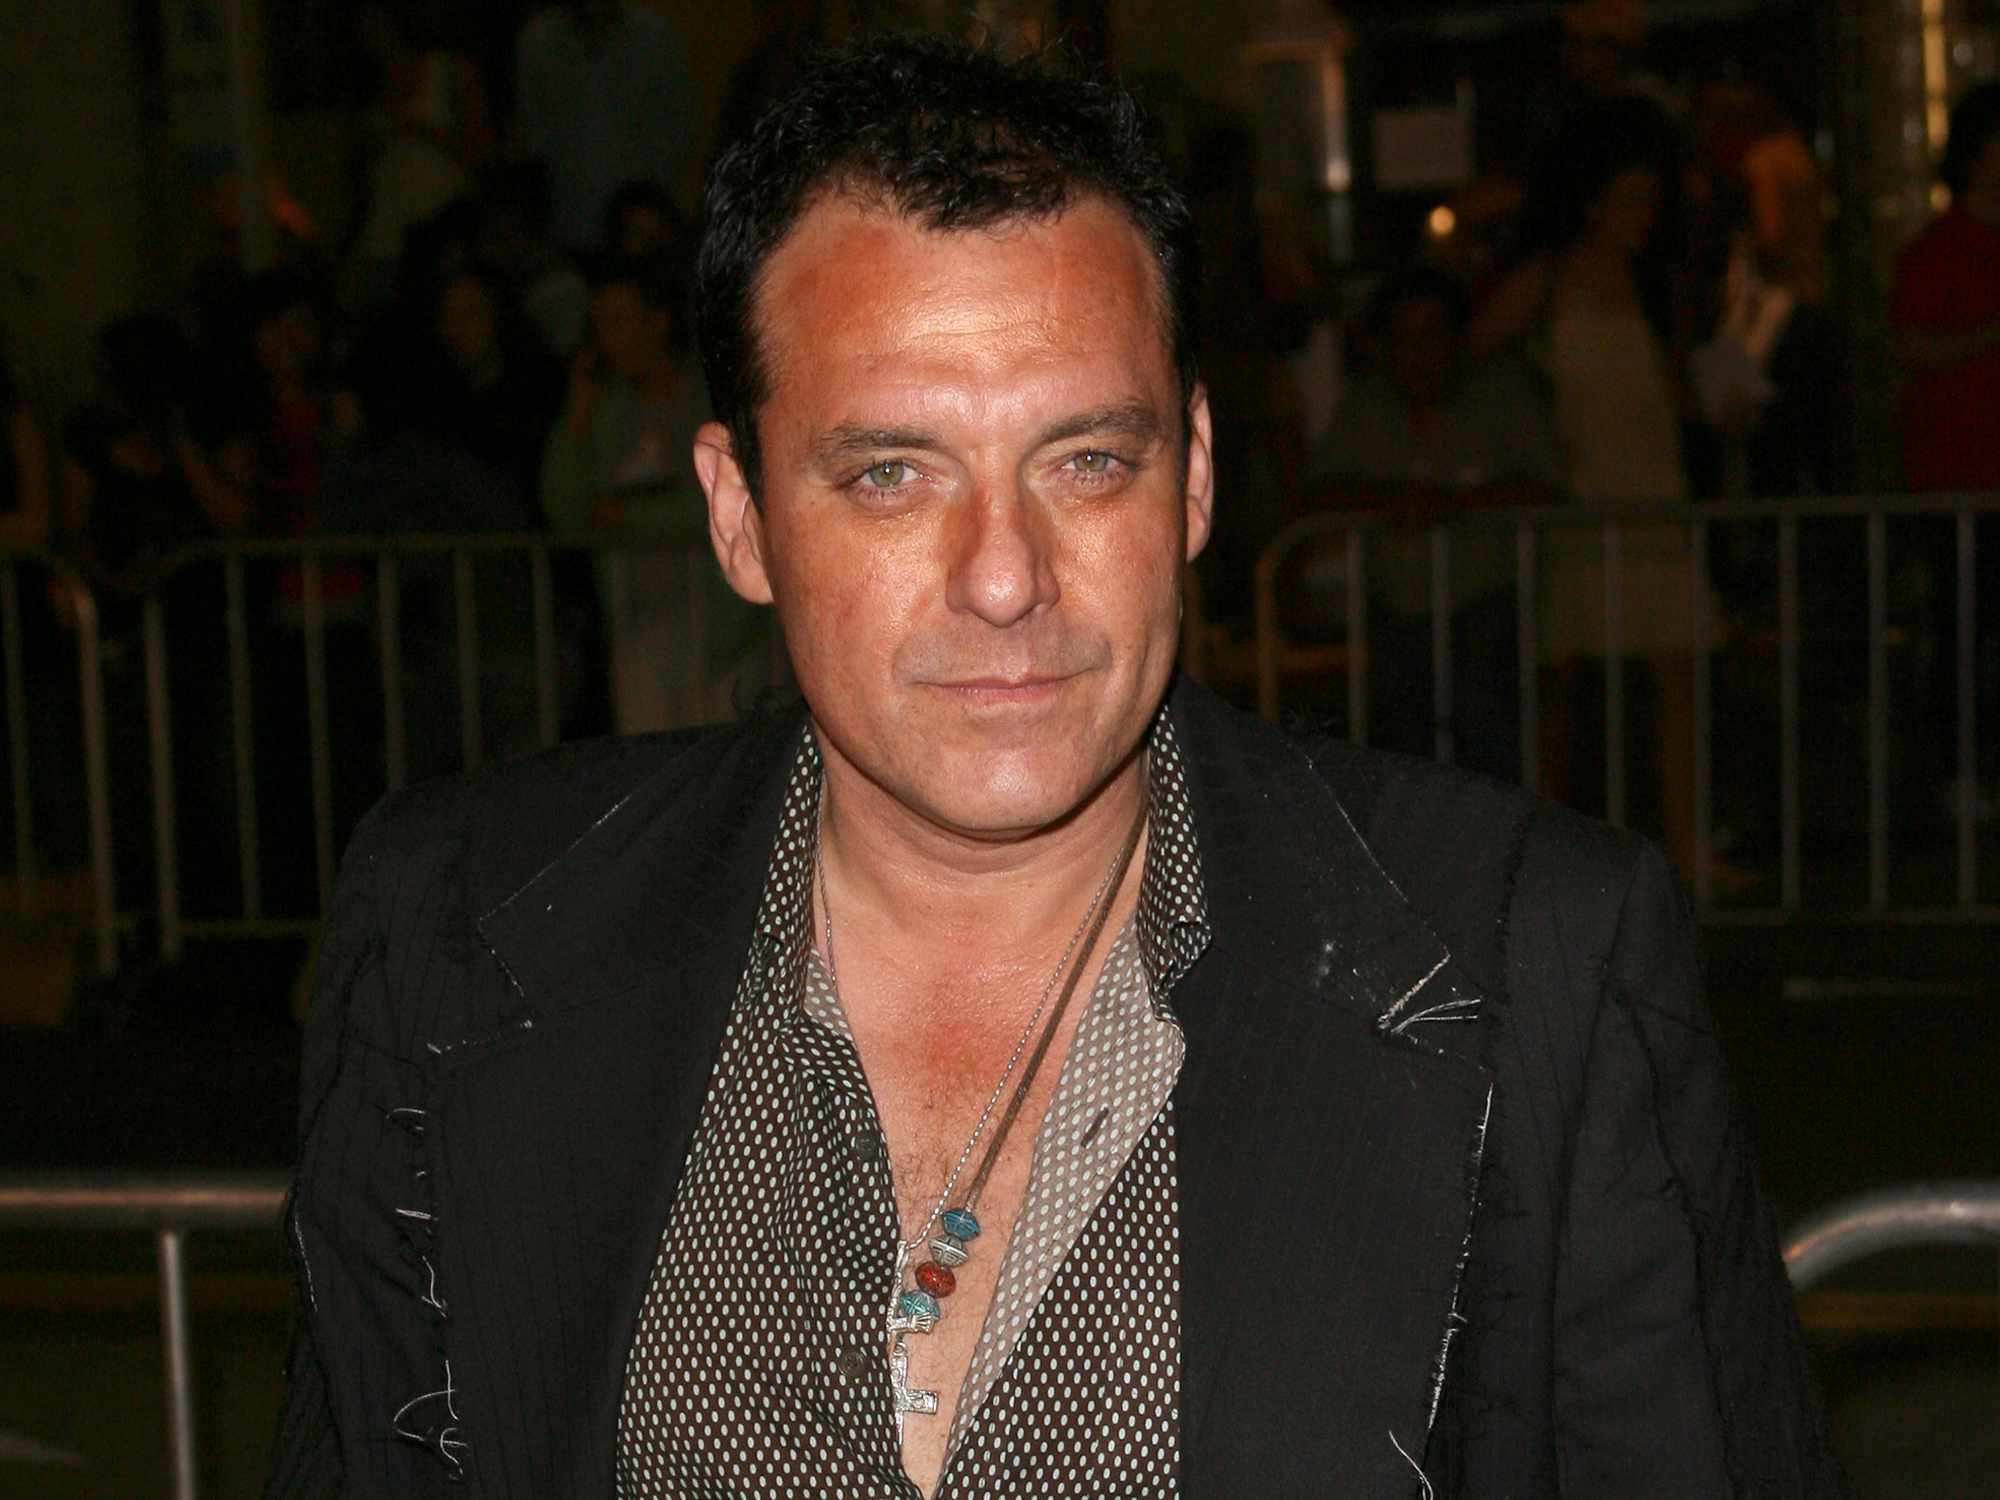 Tom Sizemore during "Babel" Los Angeles Premiere - Arrivals at Mann Village in Westwood, California, United States